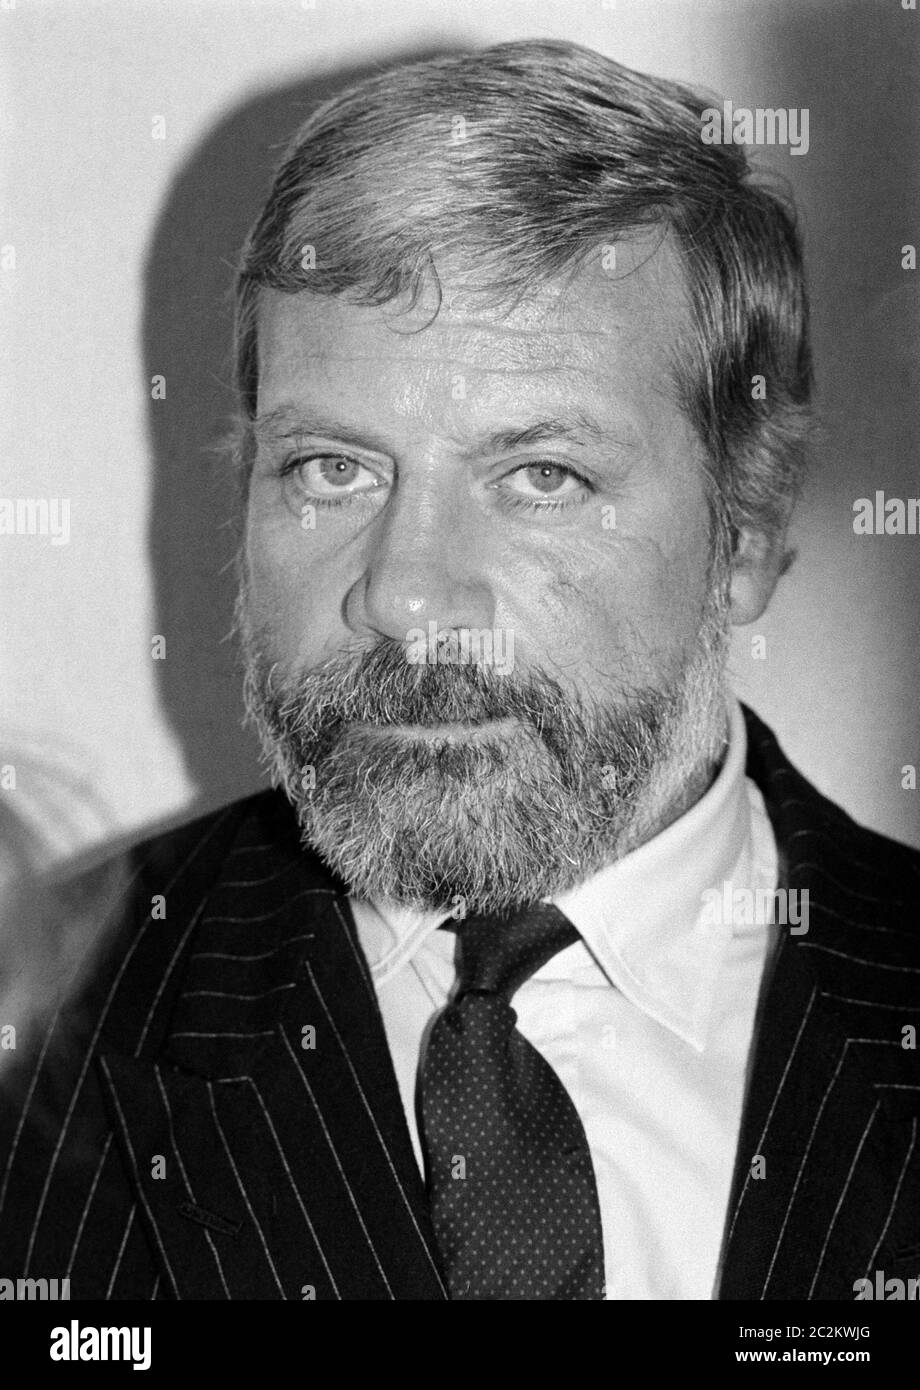 LONDON, UK. Sept 1985: Actor Oliver Reed in London. © Paul Smith/Featureflash  Stock Photo - Alamy